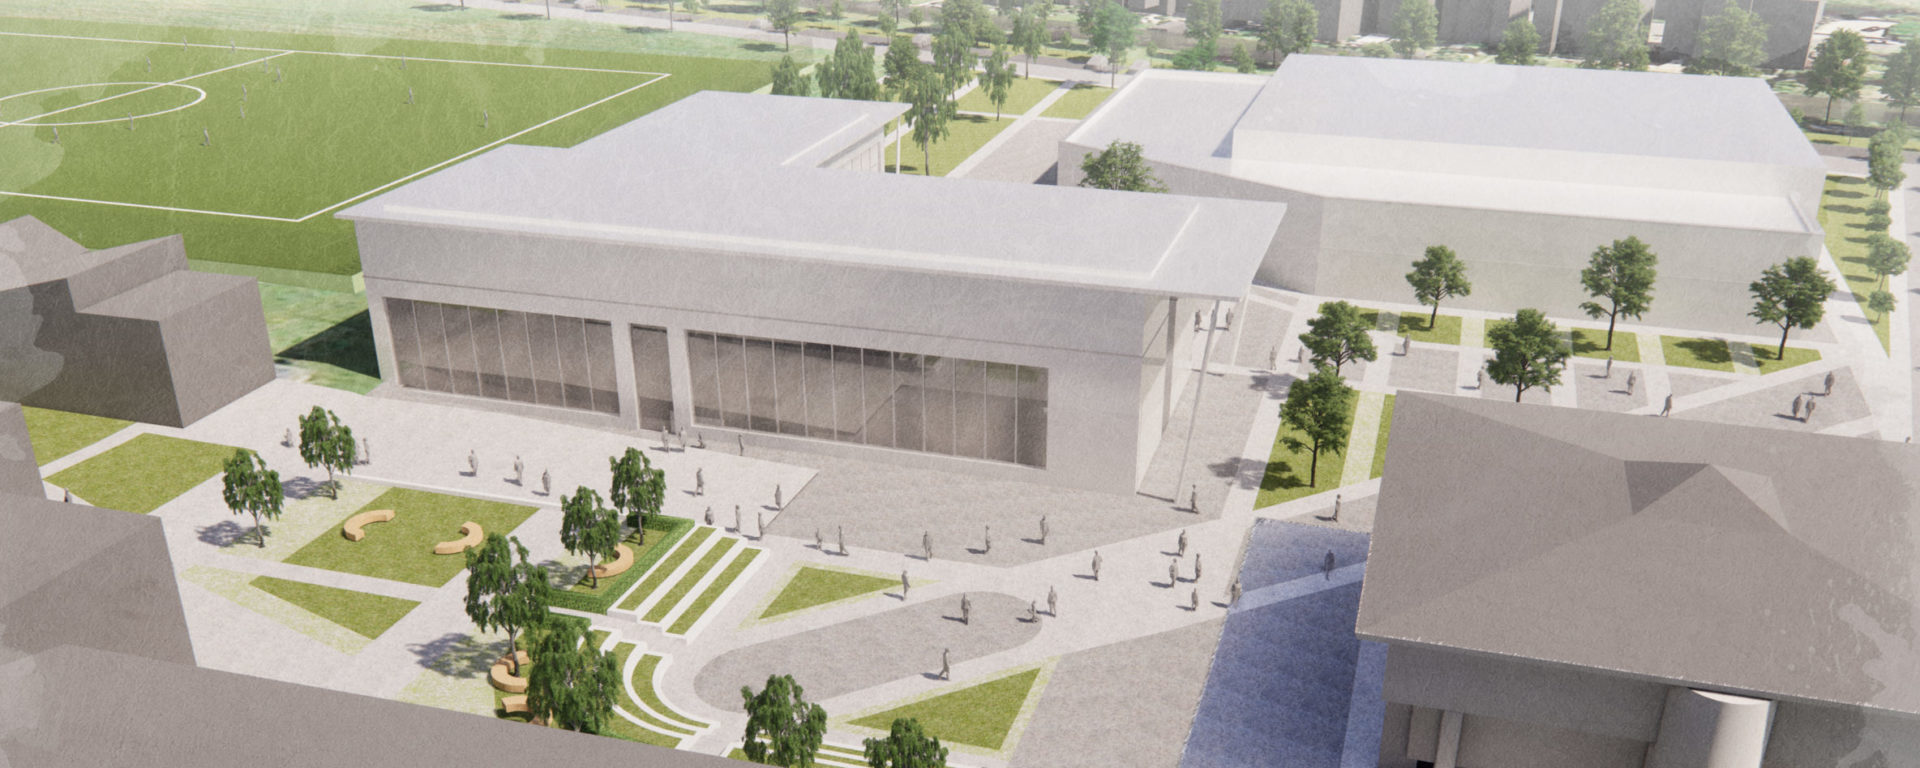 Artist impression of the sports centre showing a large glass fronted building